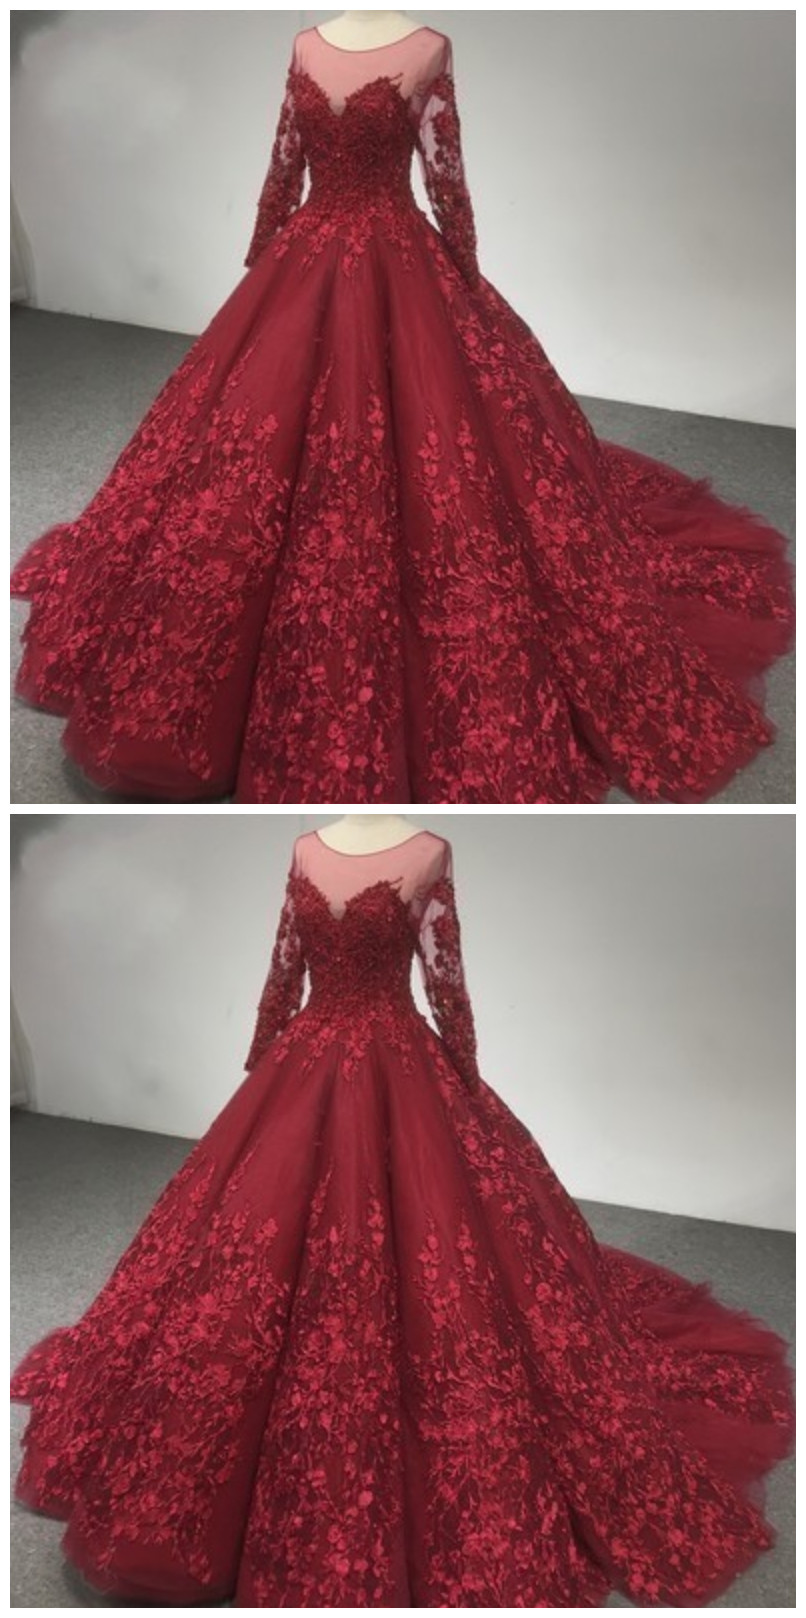 Fashion Lux Luxury Lace Wedding Dress,long Sleeve Burgundy Ball Gown Bride Dresses